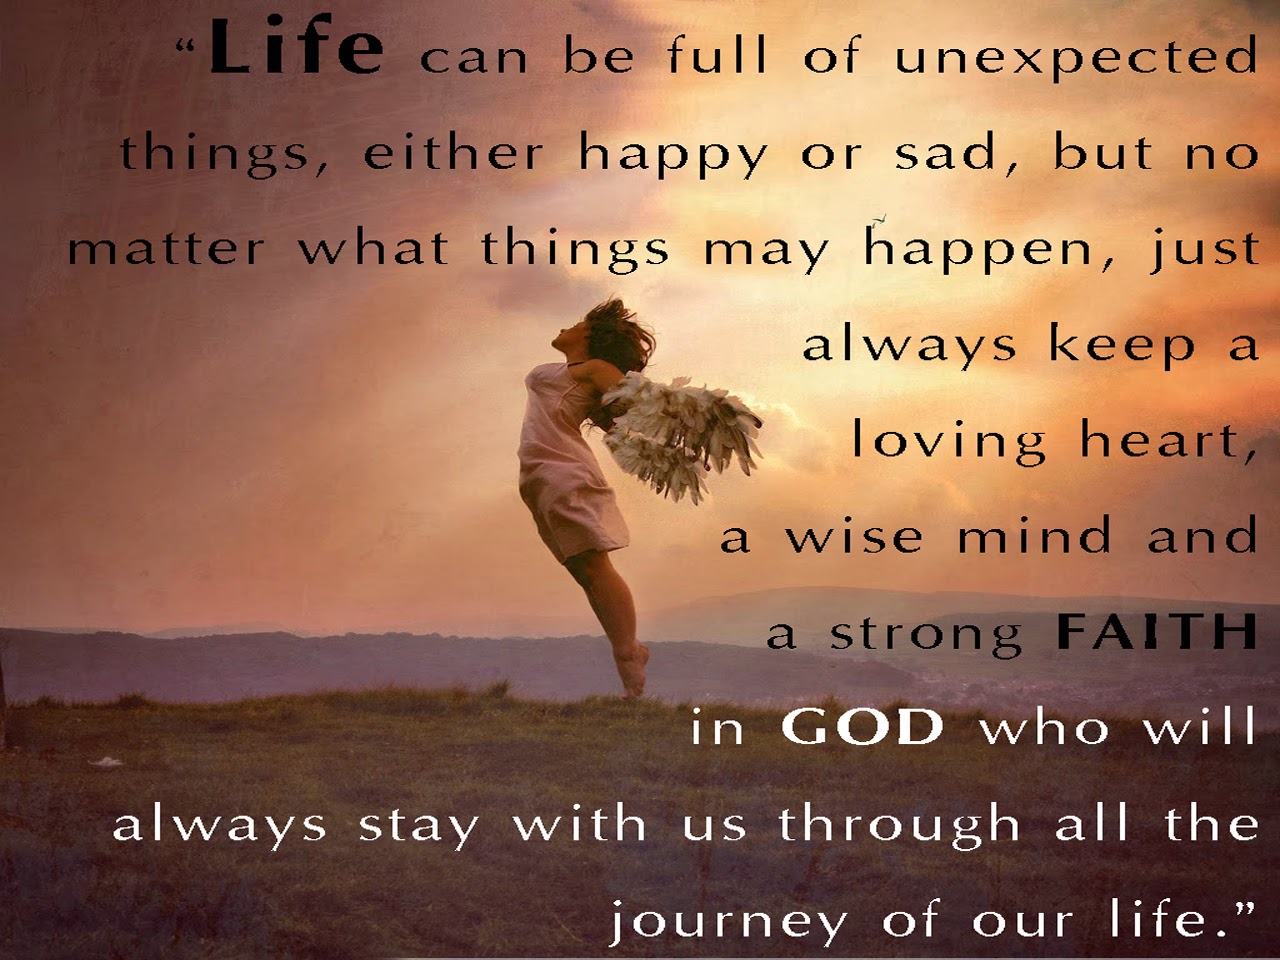 Faith and trust in god quotes sayings with images